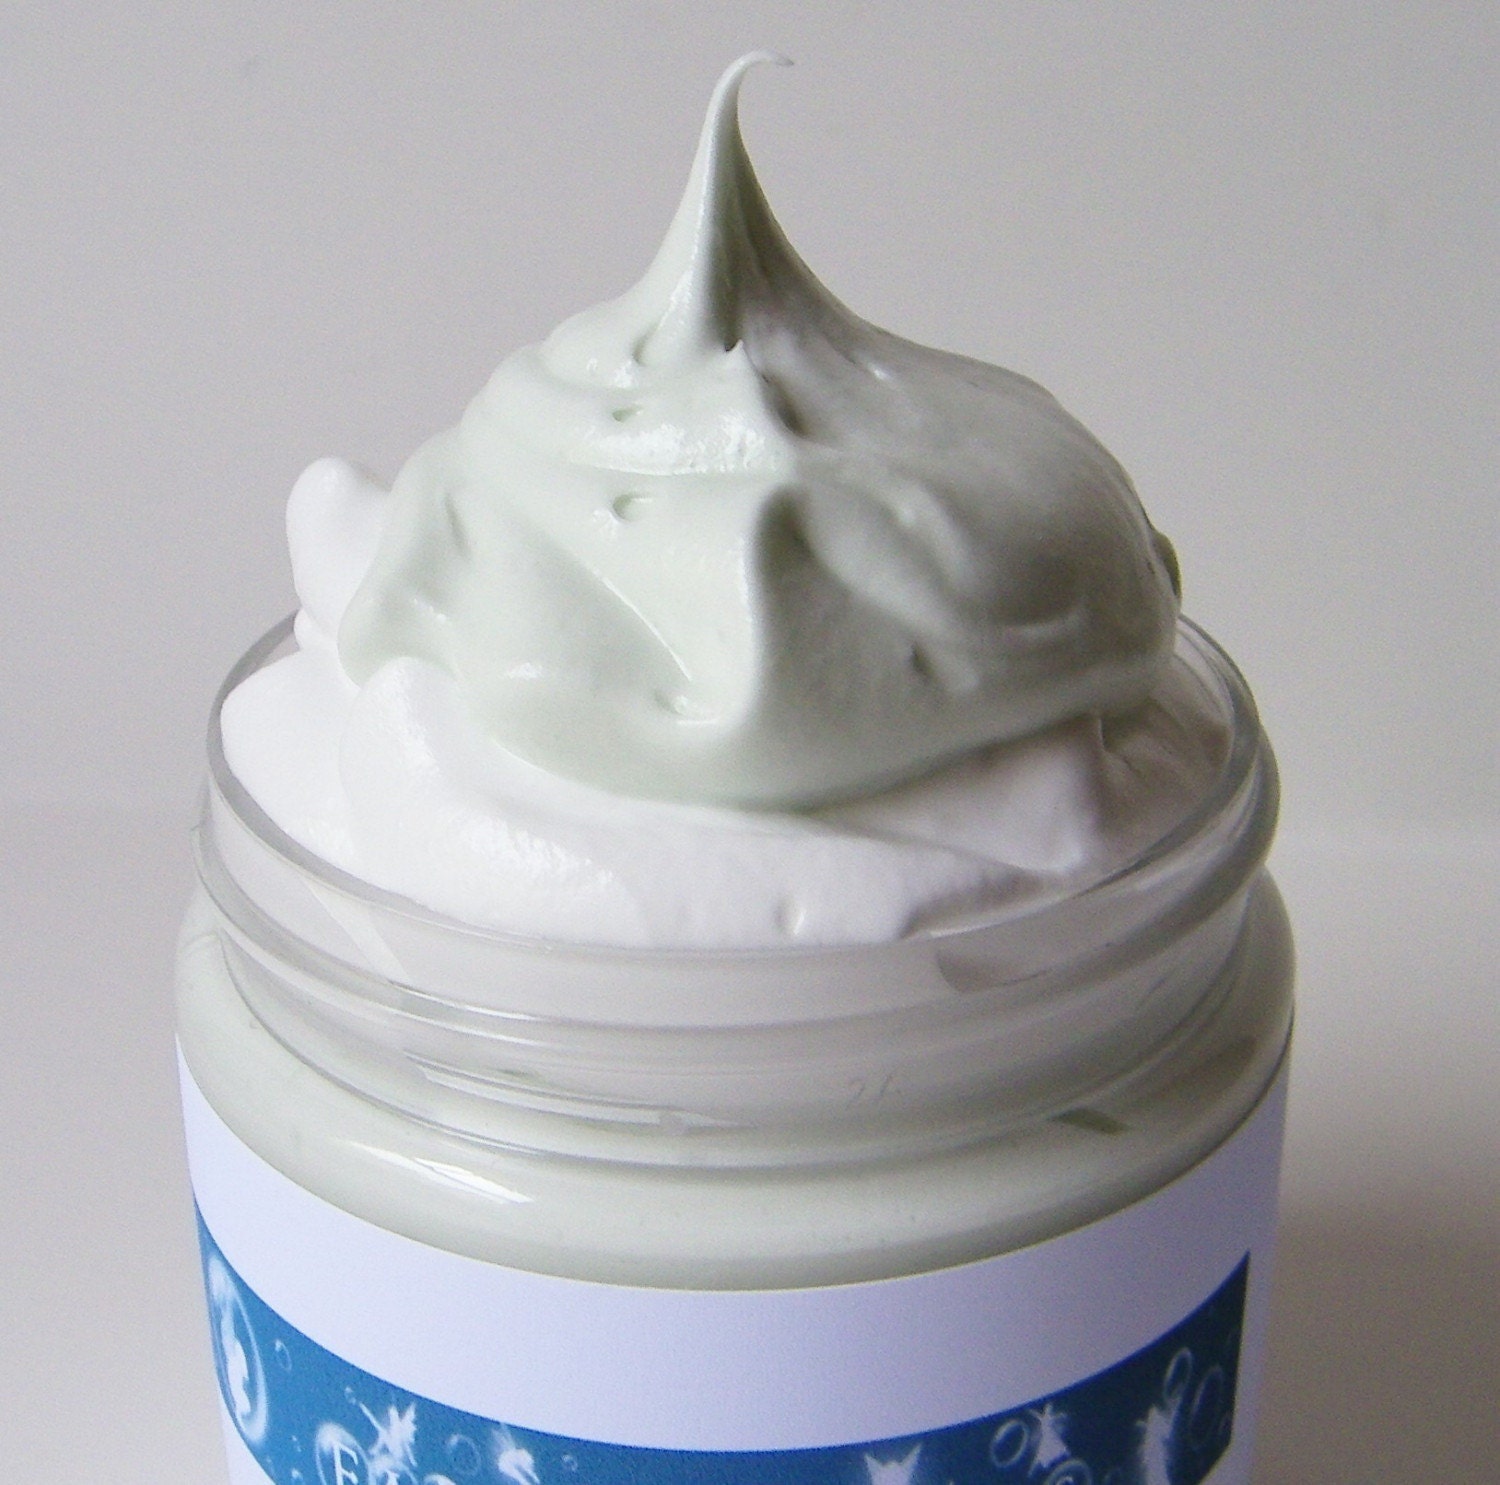 Download Body Washes Lime and Coconut Whipped Soap Cream Soap Vegan